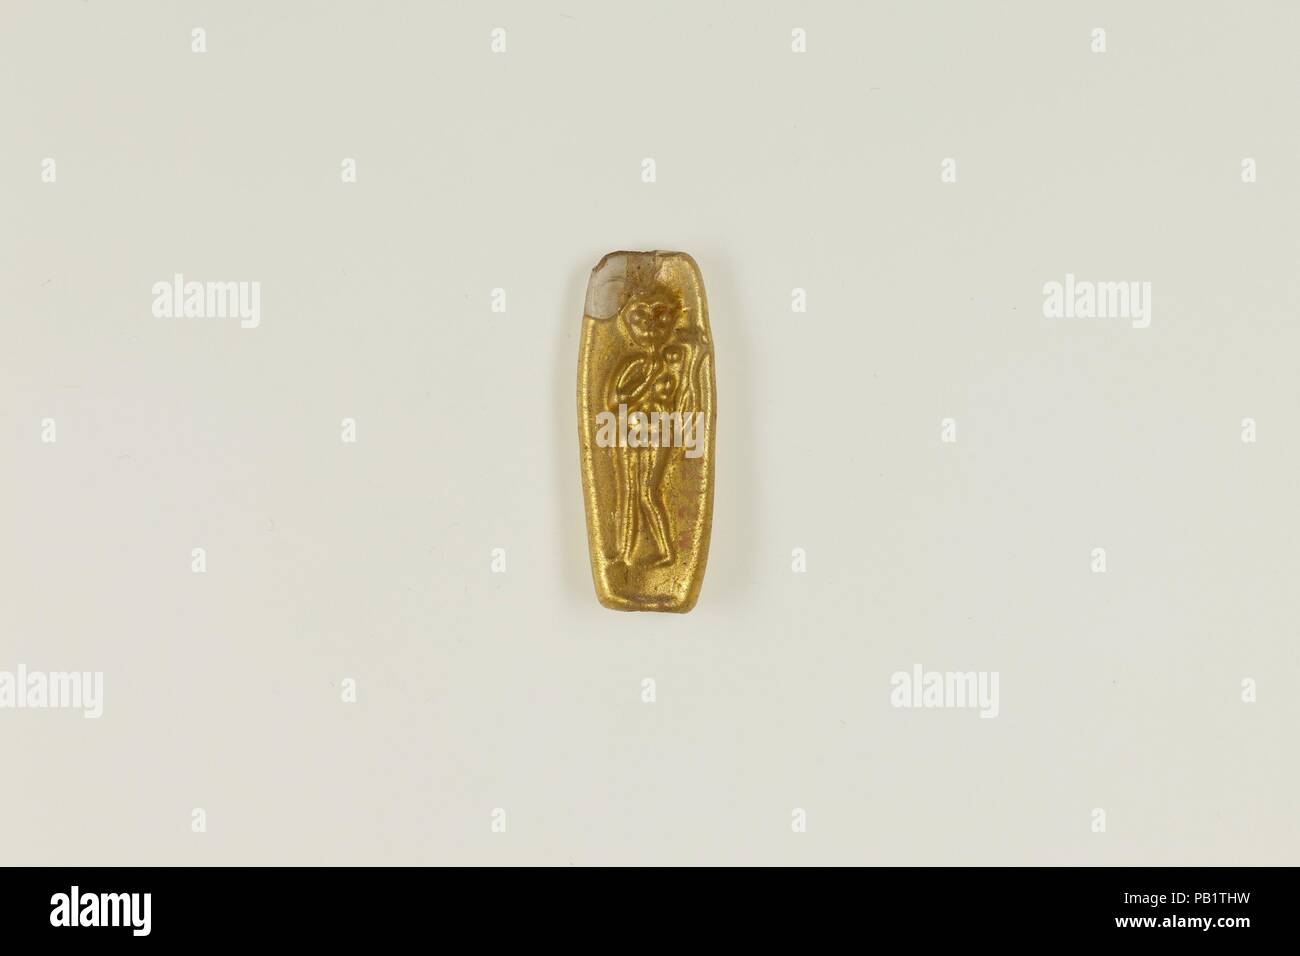 Bead with figure of Harpokrates. Dimensions: H. 2.7 × W. 1 cm (1 1/16 ×  7/16 in.). Date: 100 BC-100 AD. Gold glass beads were a Hellenistic  development. They were created by